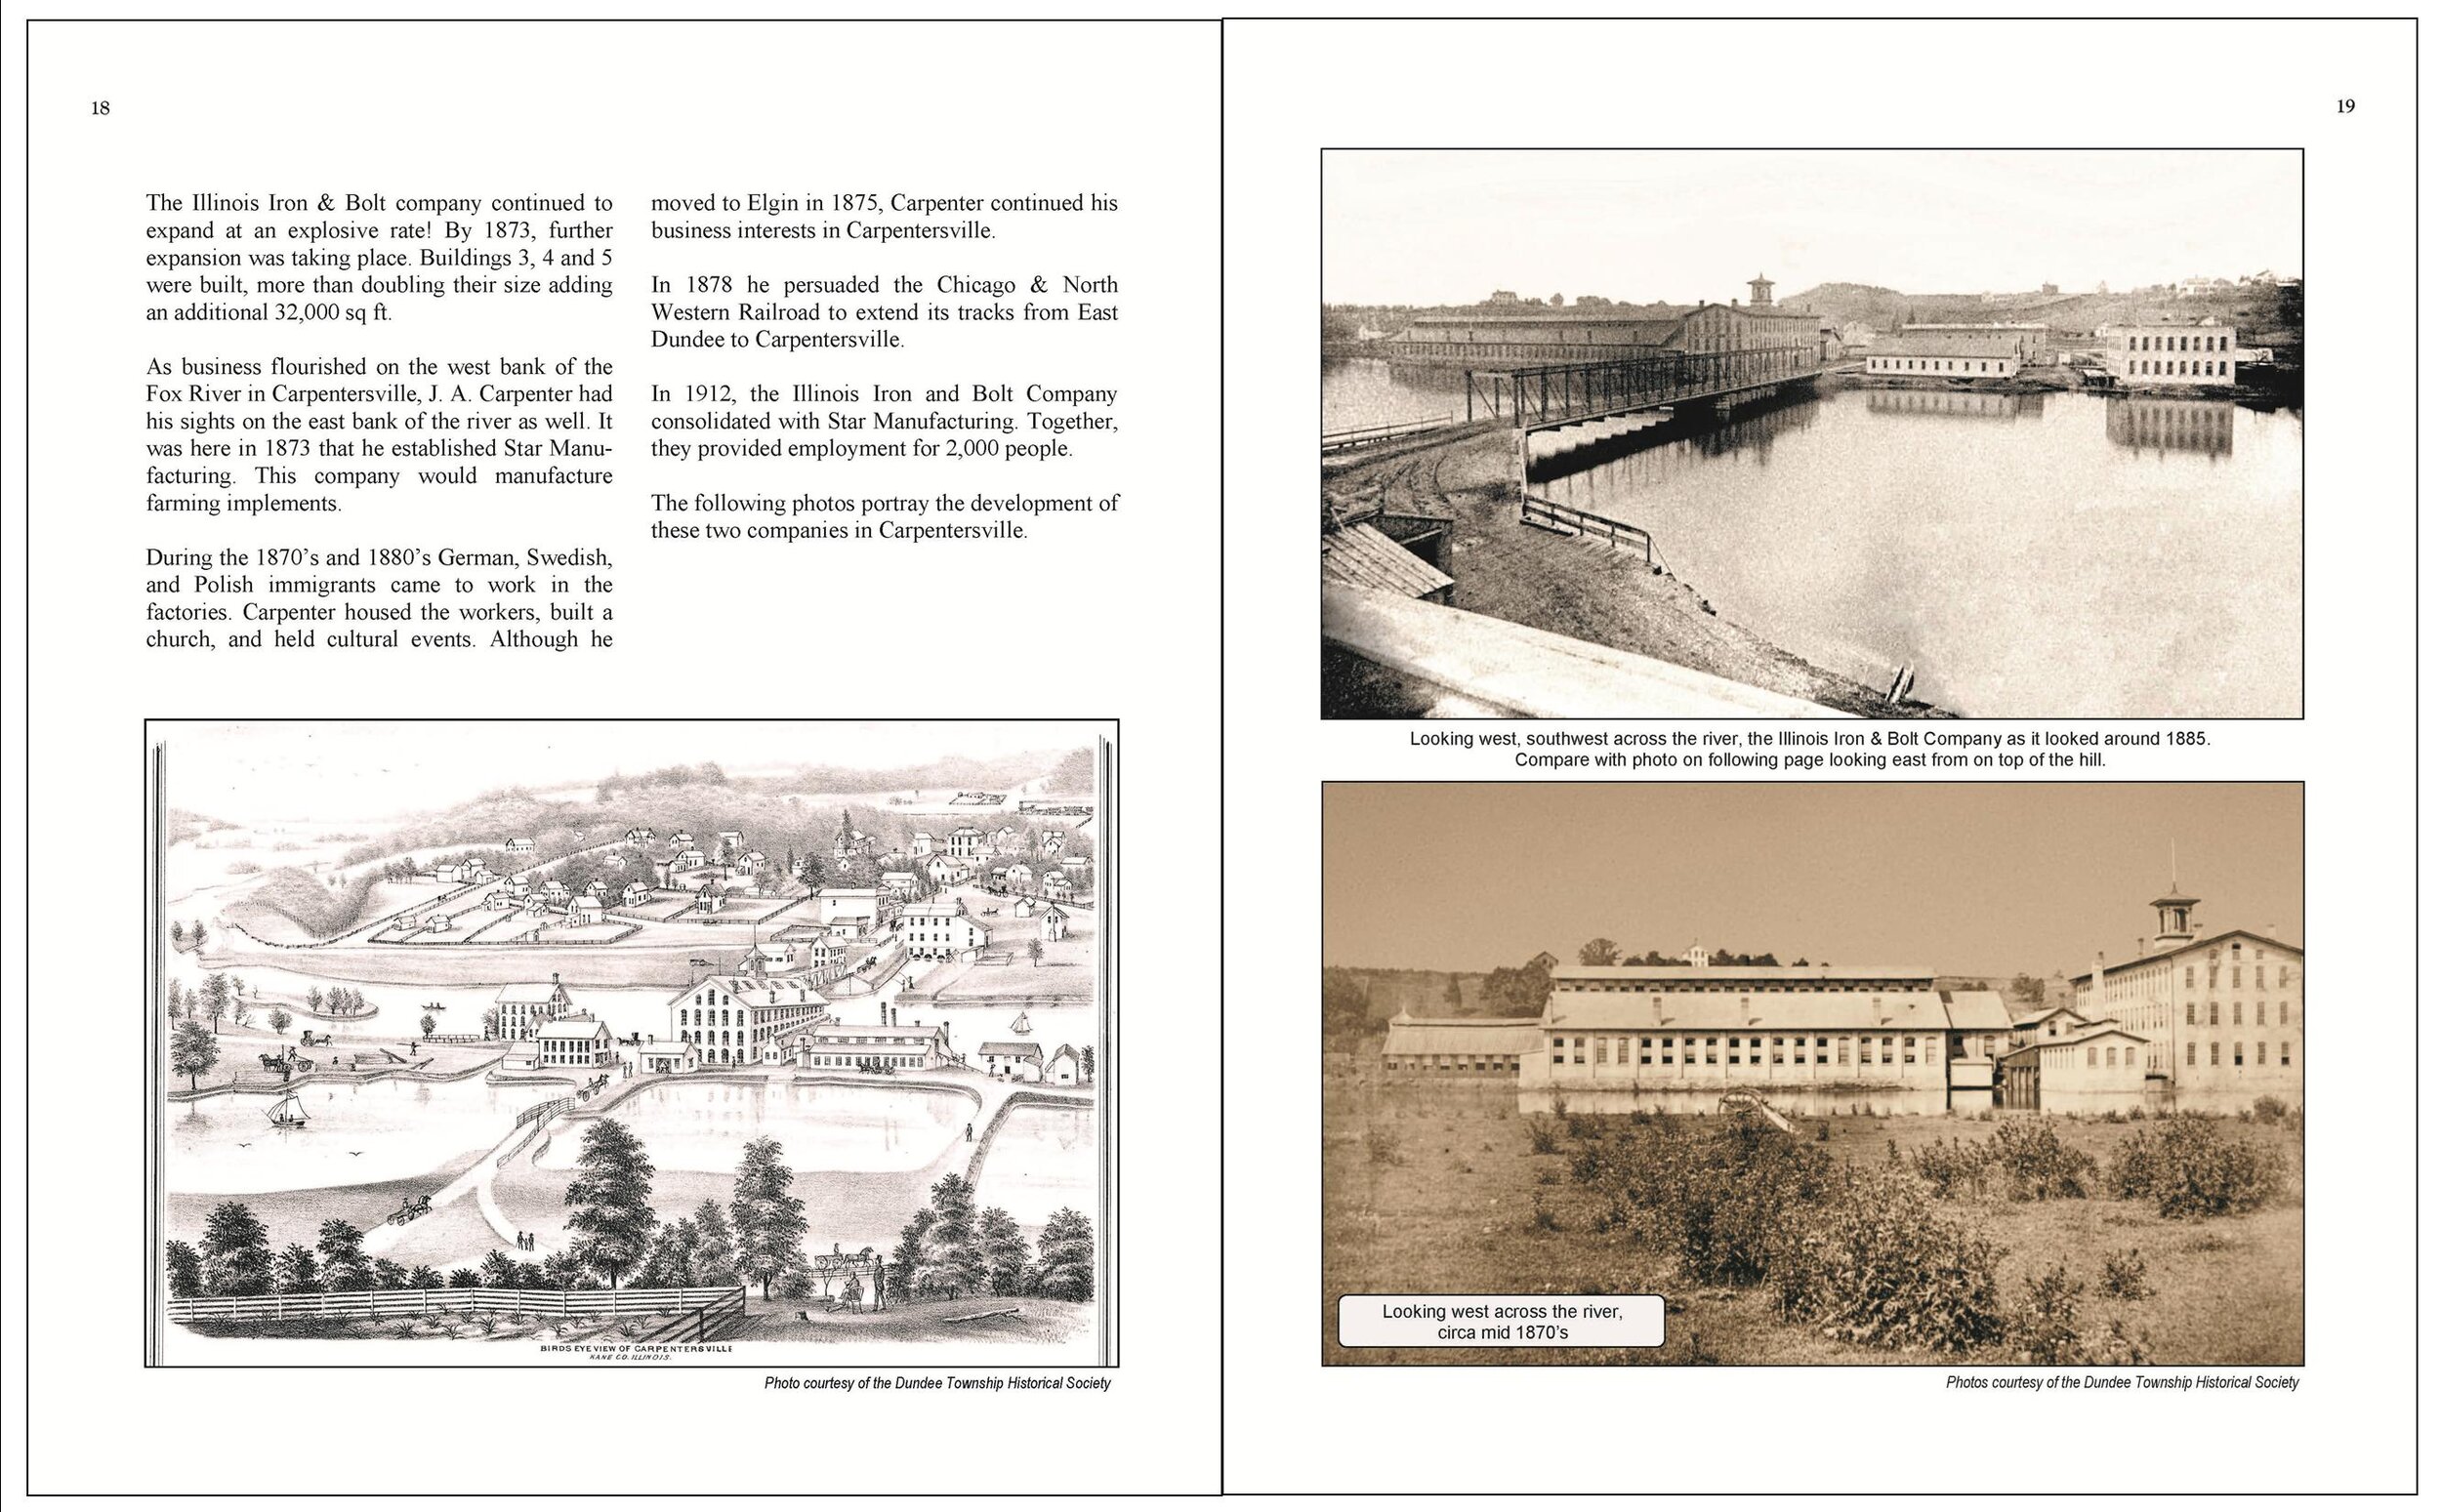 Pages 18 & 19.jpg